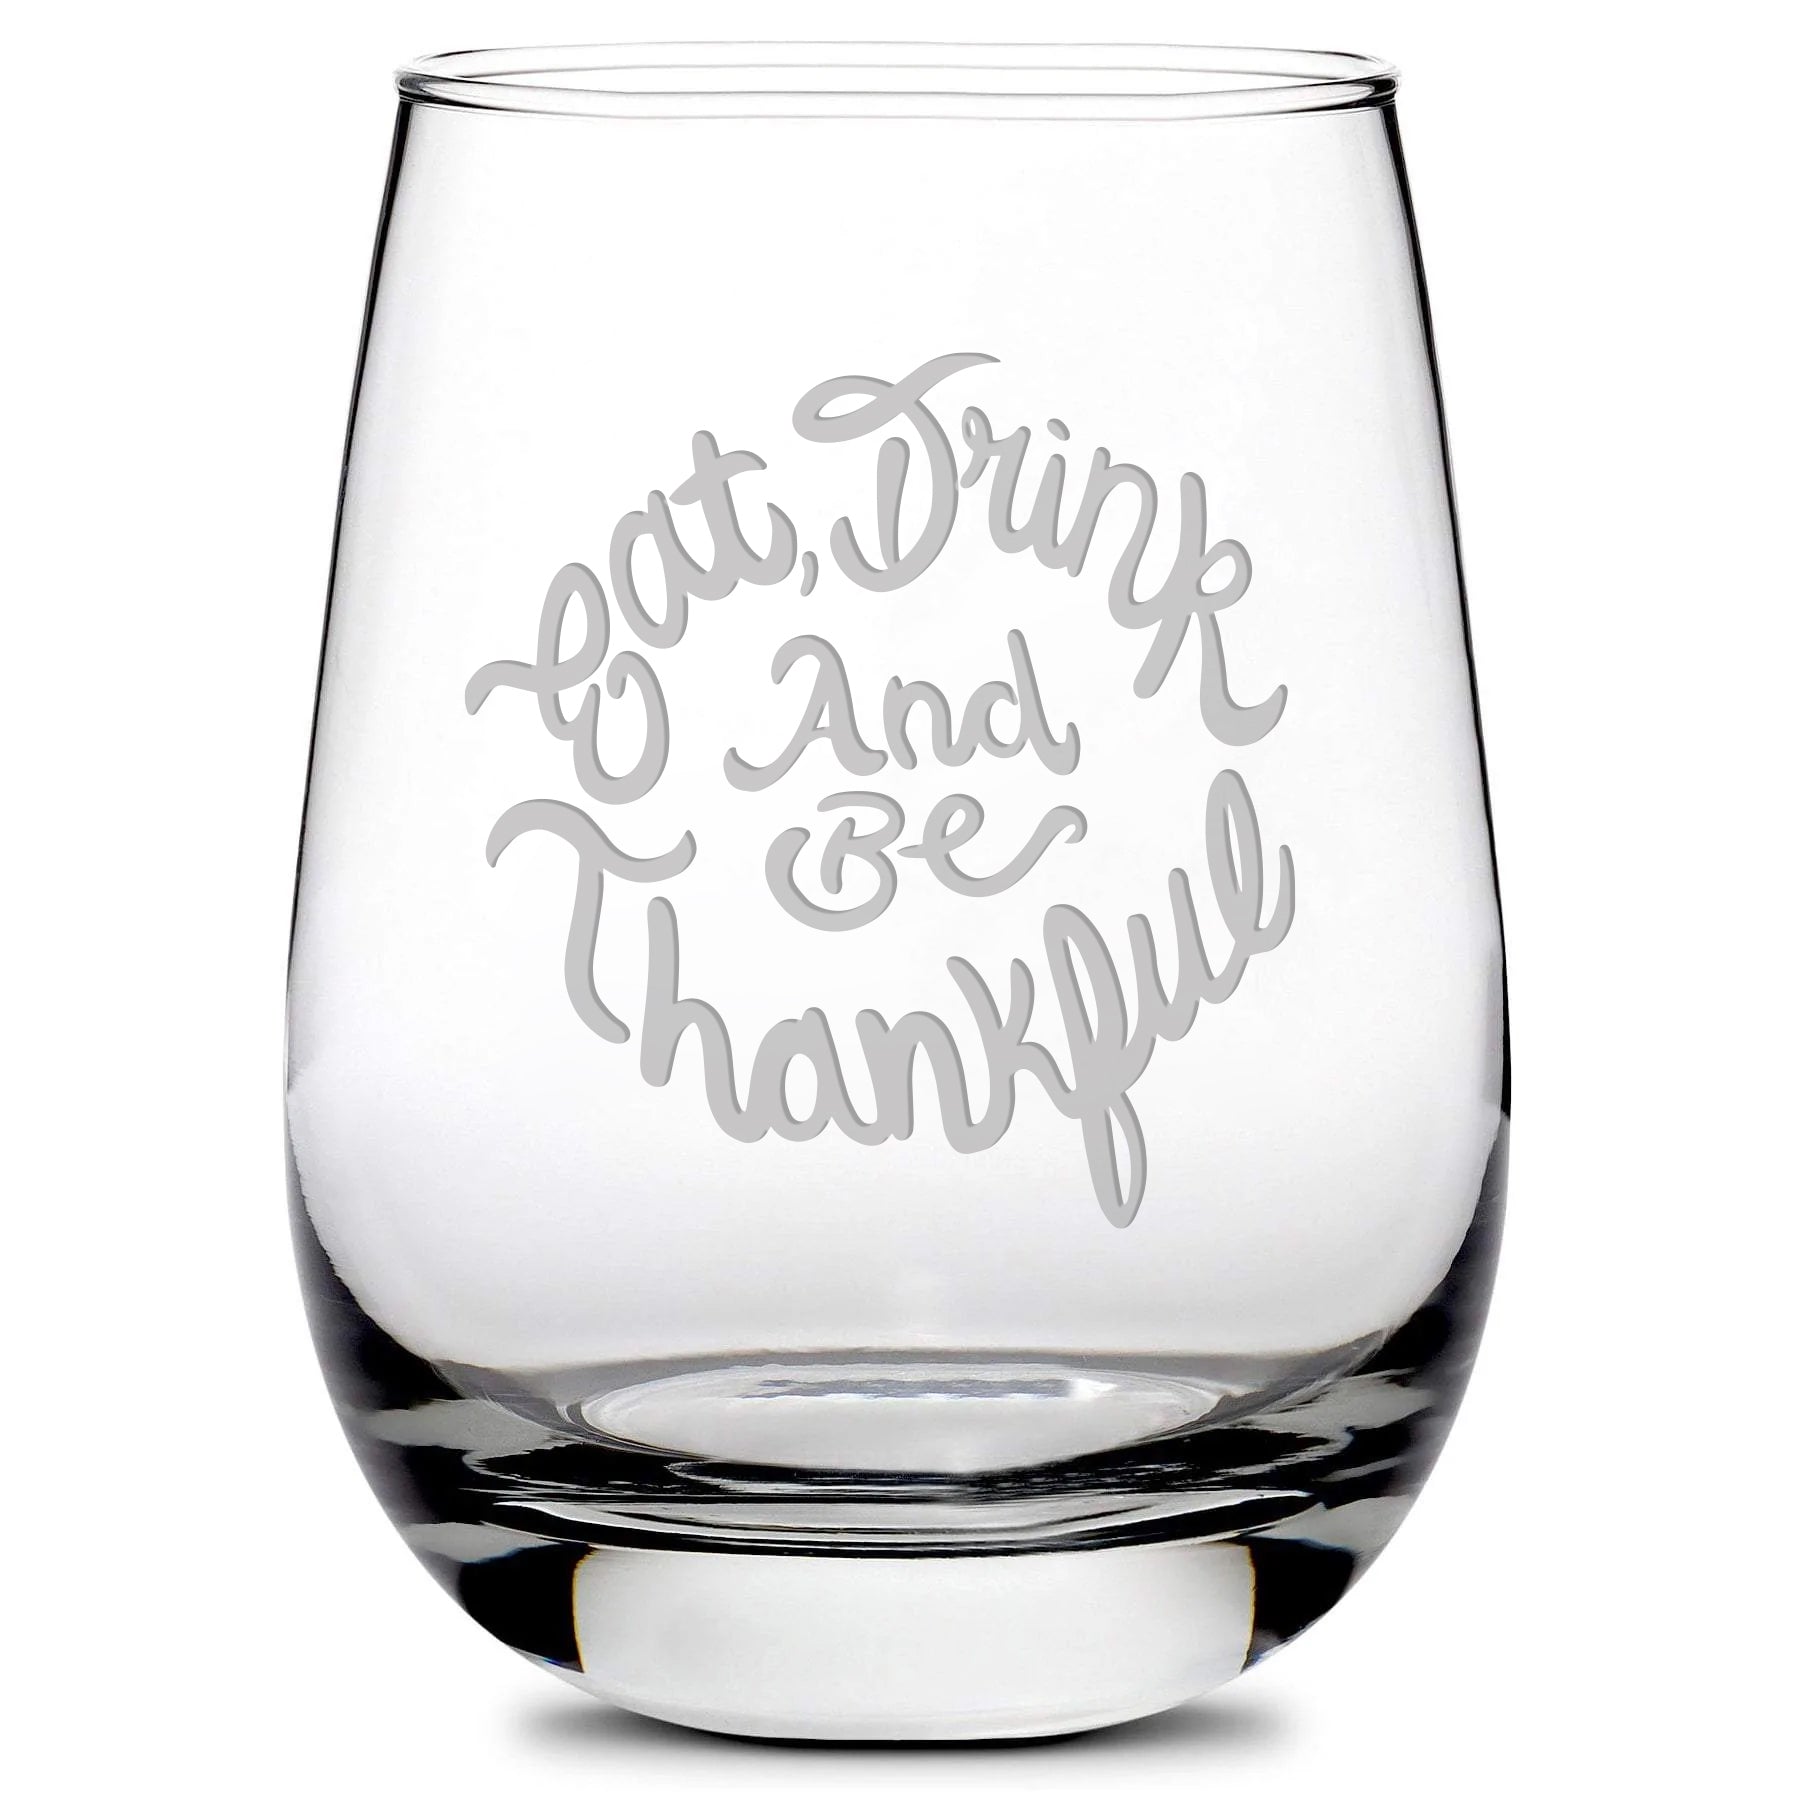 Premium Stemless Wine Glass, "Eat, Drink and Be Thankful", Hand Etched, Made in USA, 16oz